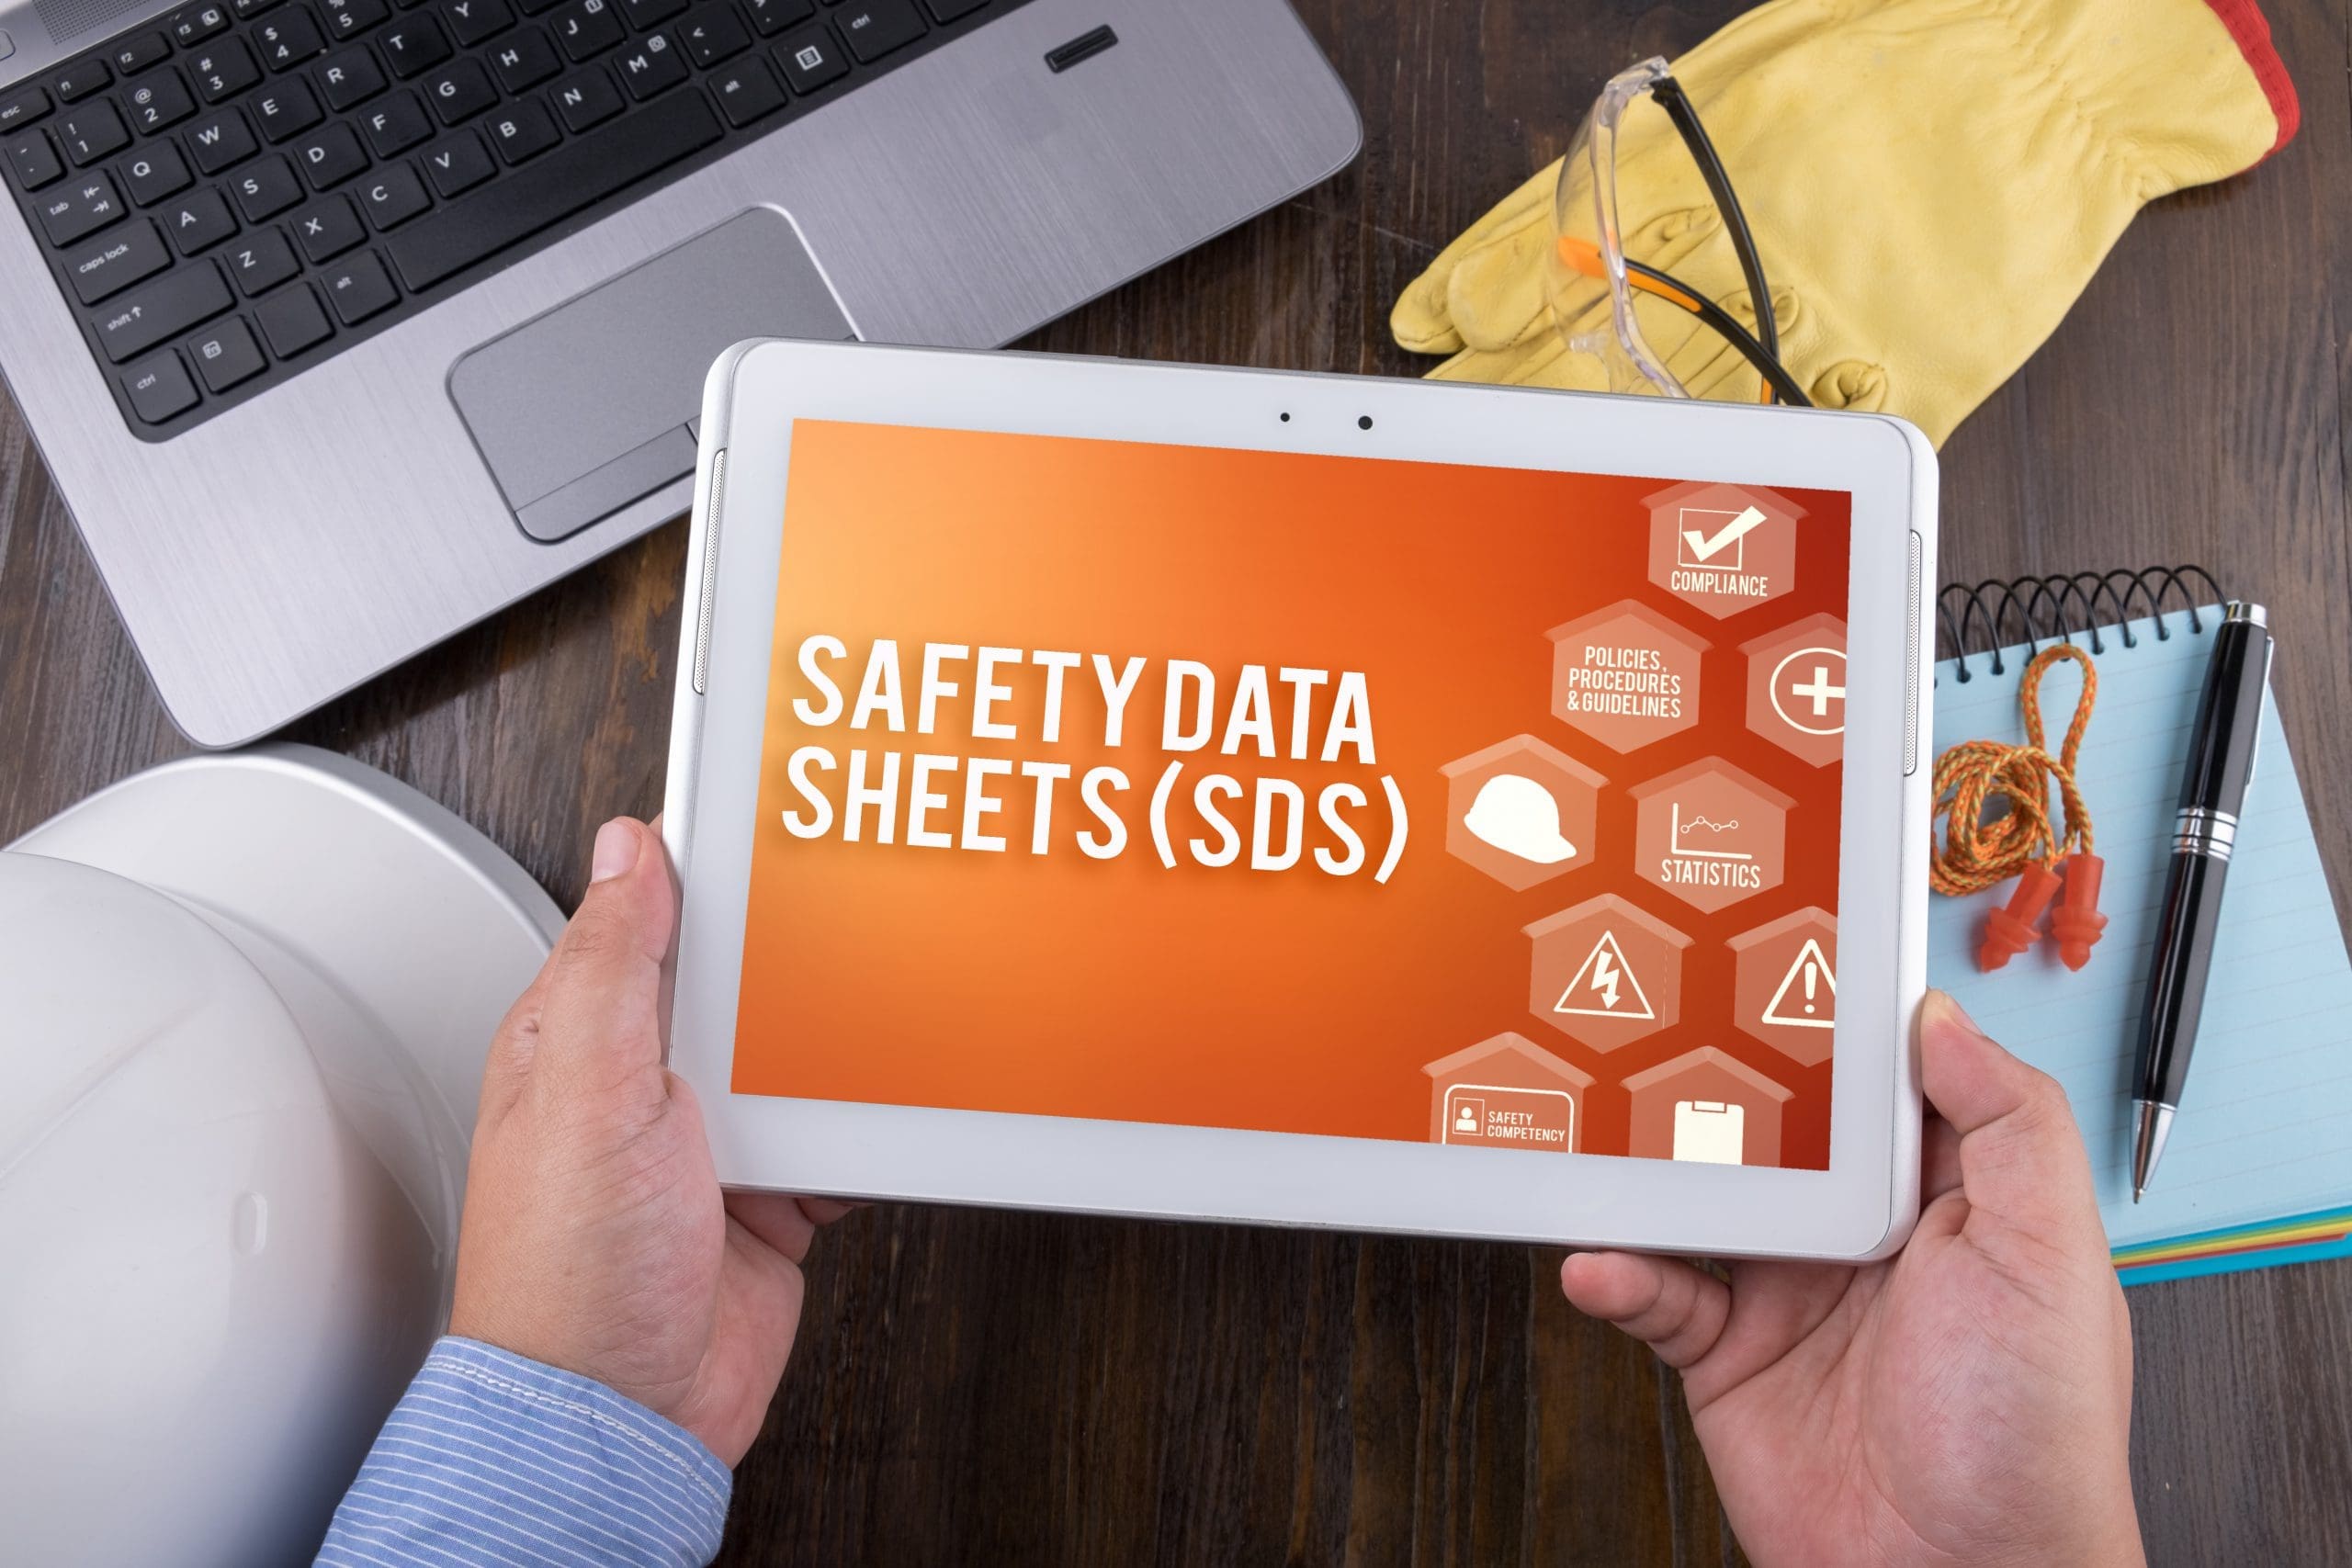 How Often Should You Update Your Safety Data Sheets?